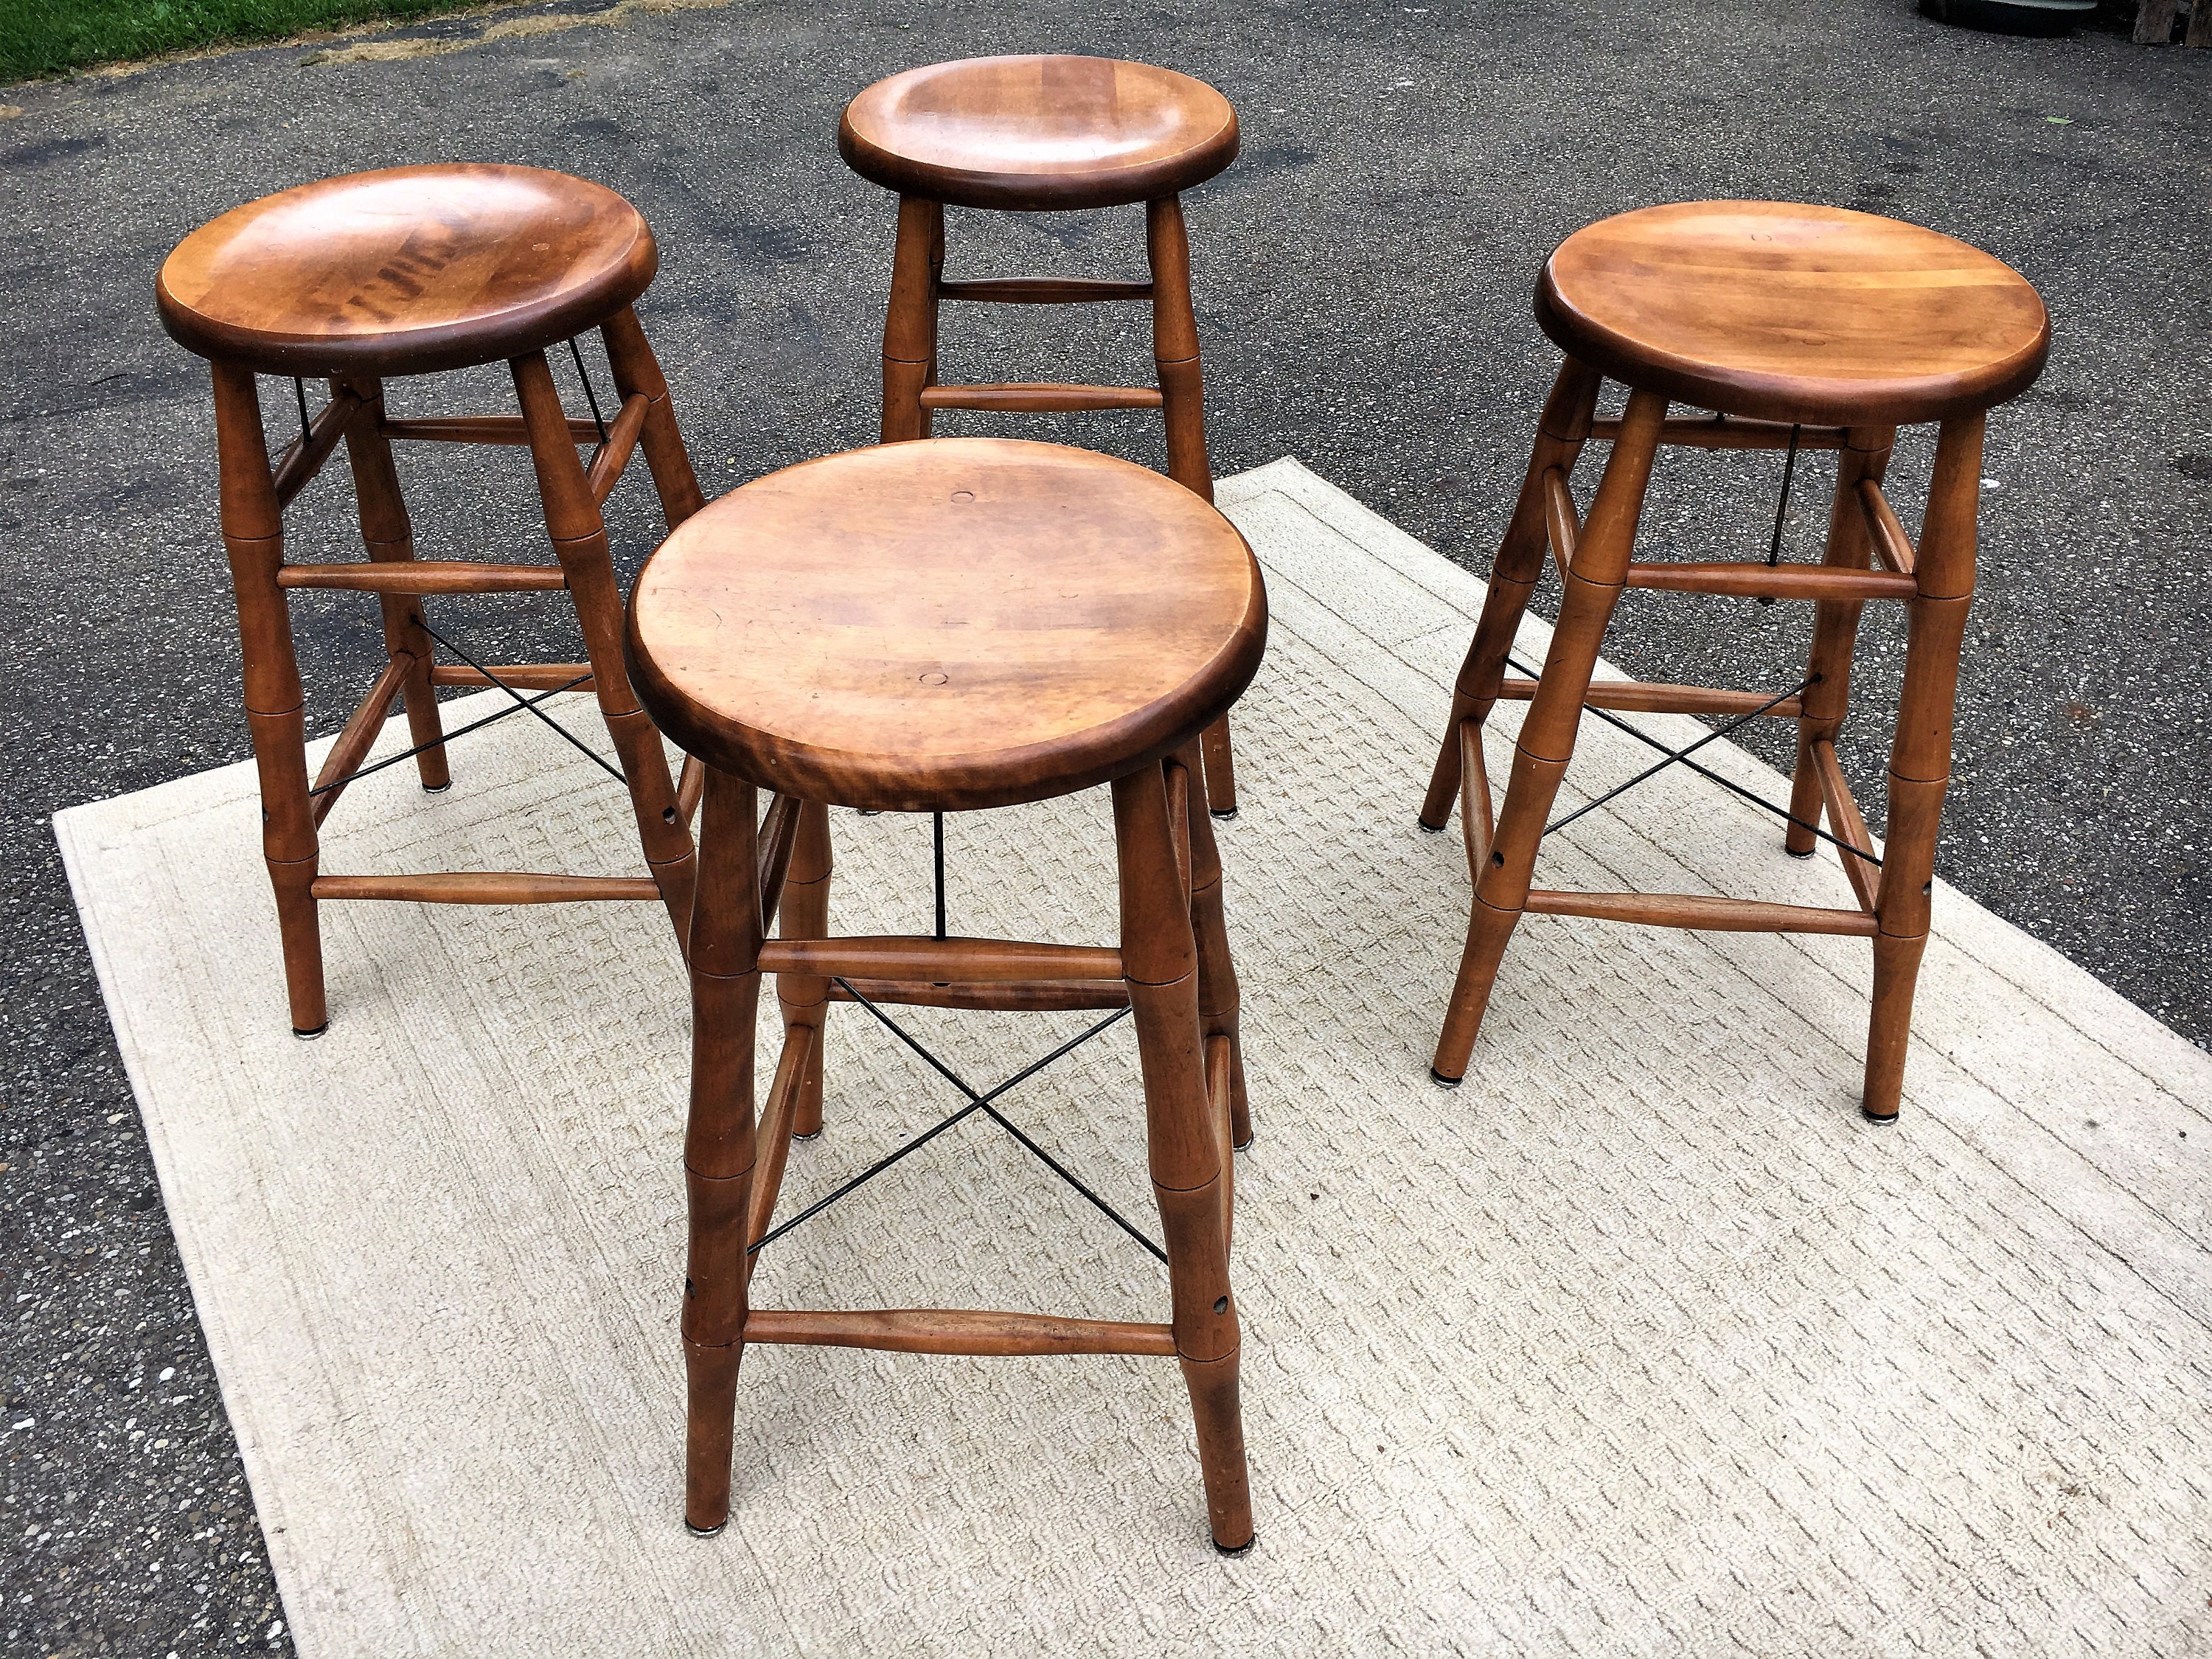 Vintage Maple Bar Stools (4), Bent Bros Stools, Bamboo Style Counter